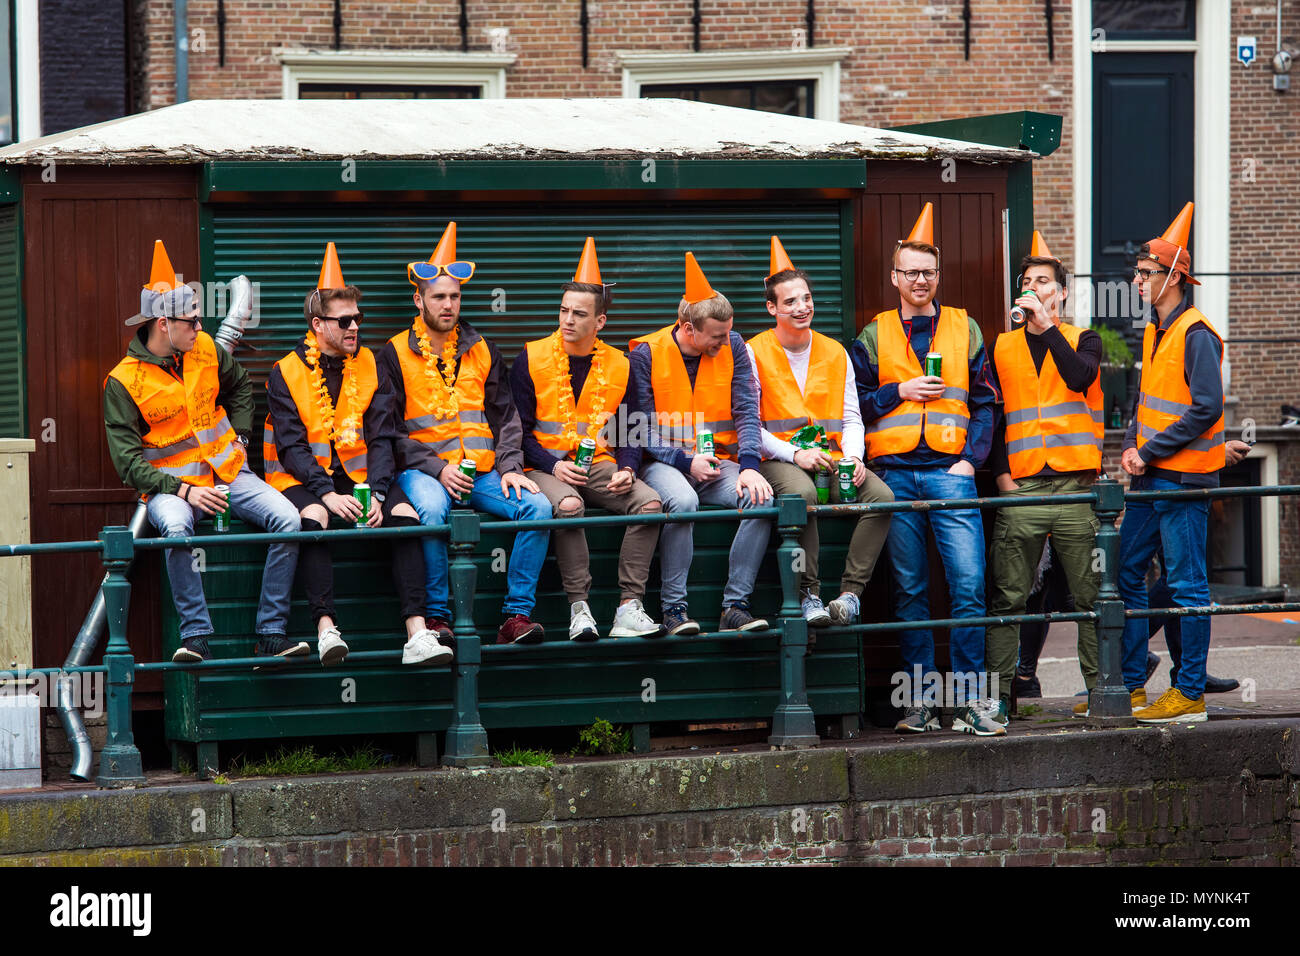 People on the street celebrate King's day in Amsterdam city, Netherlands Stock Photo